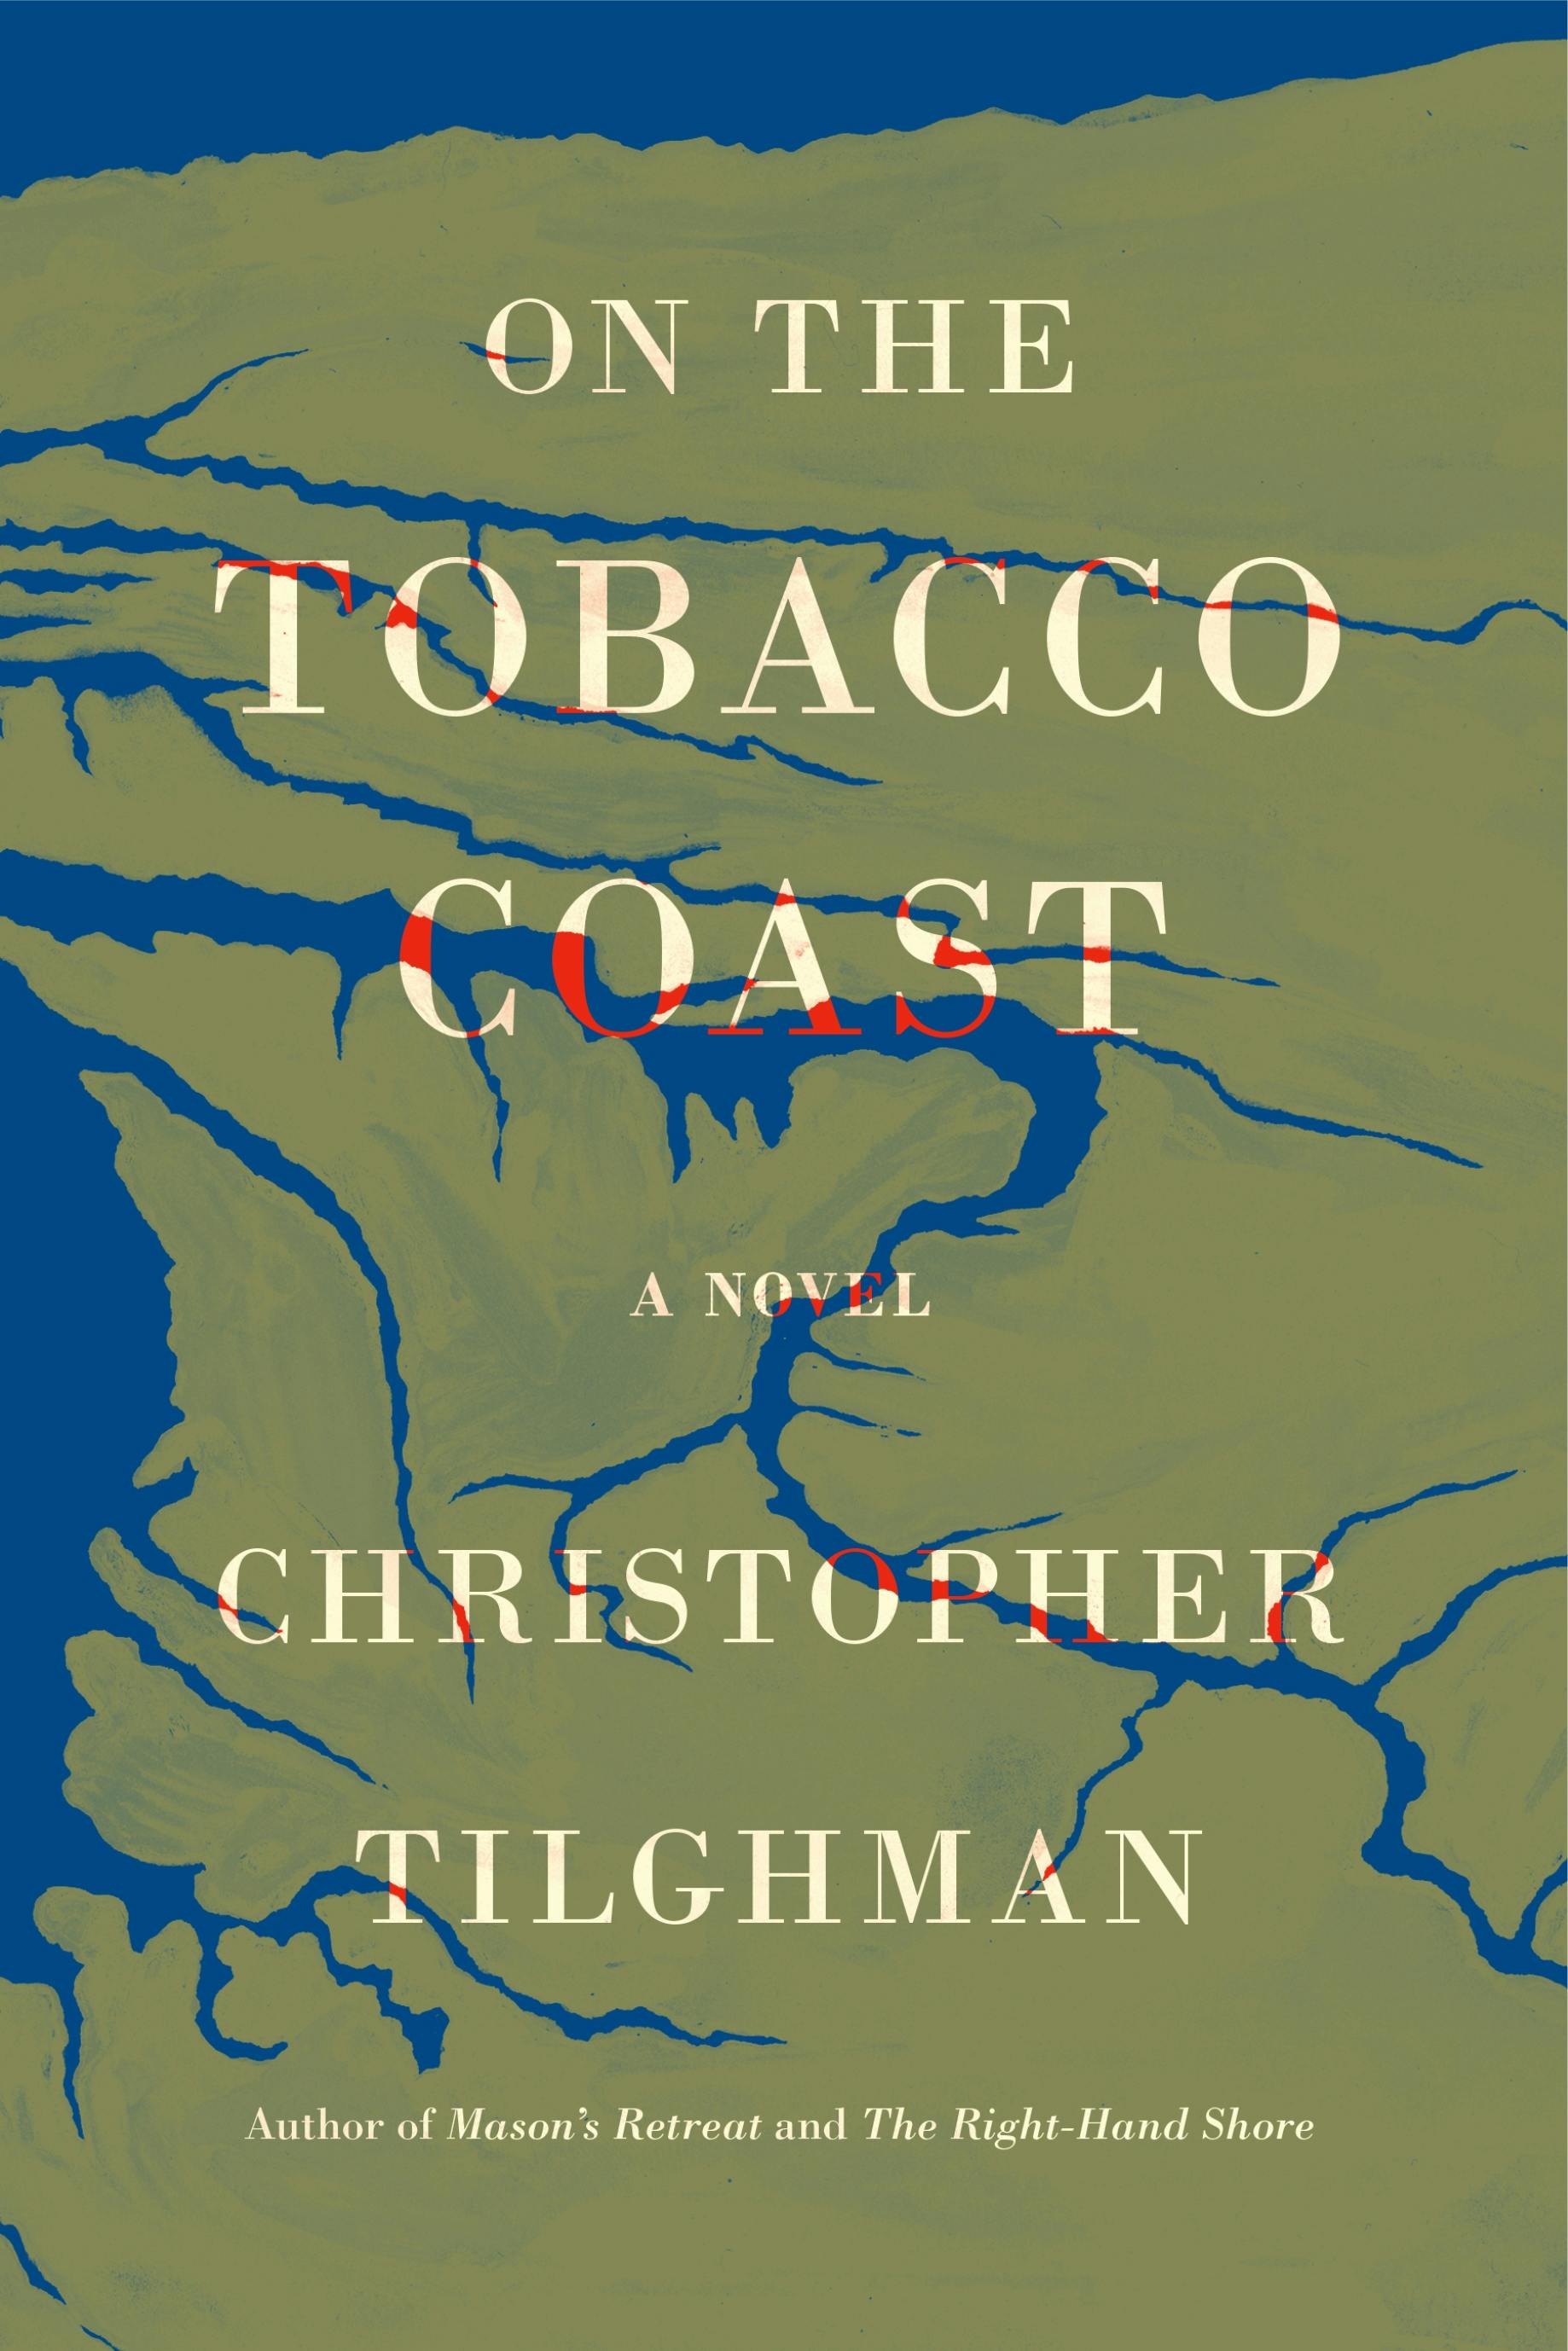 Image of On the Tobacco Coast